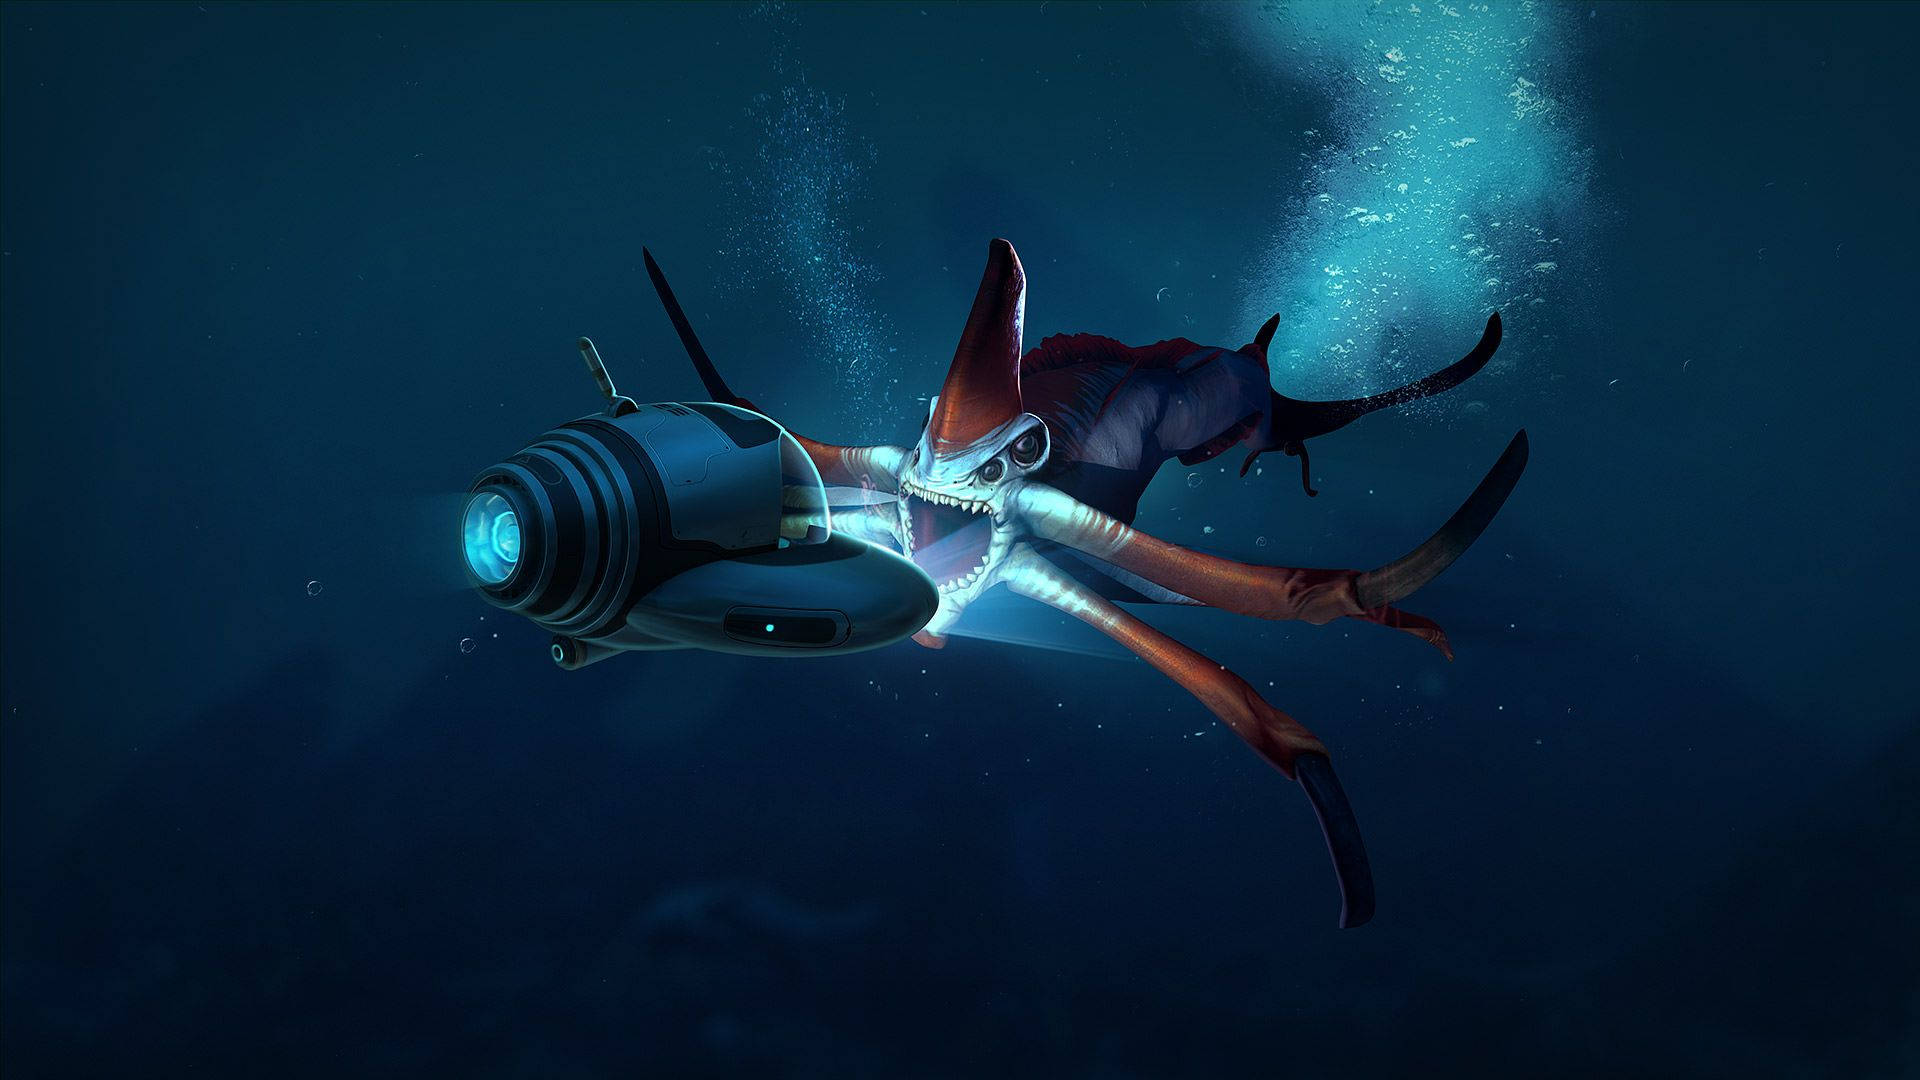 Underneath the depths of Subnautica lies the formidable Reaper Leviathon Wallpaper